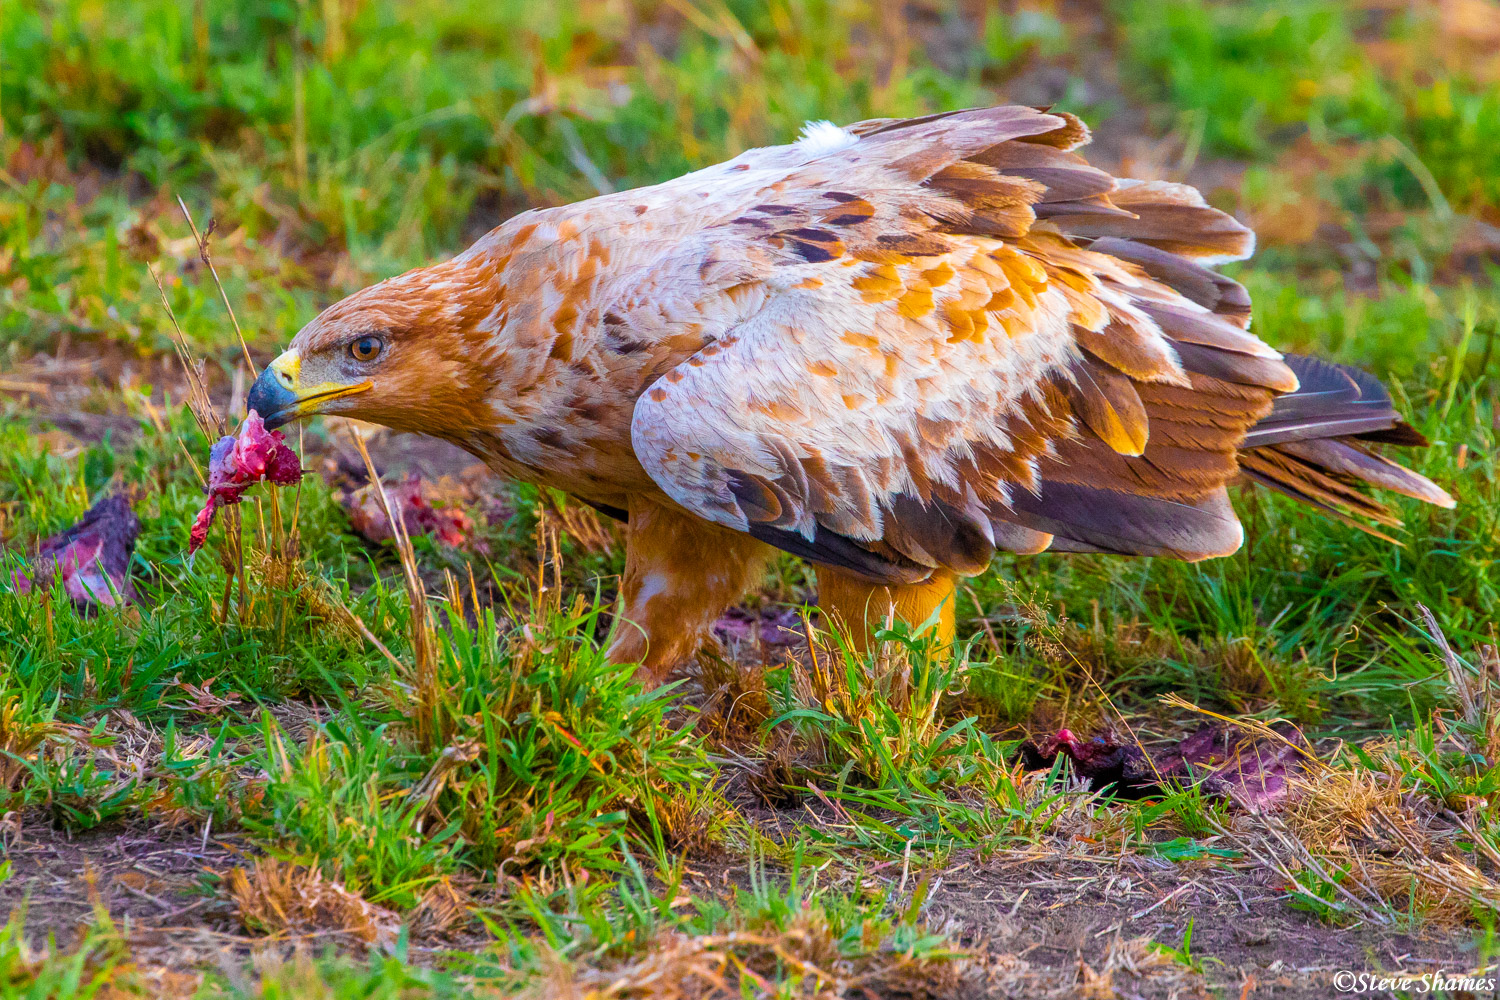 A tawny eagle eating some scraps from a cheetah kill. These are beautiful birds.